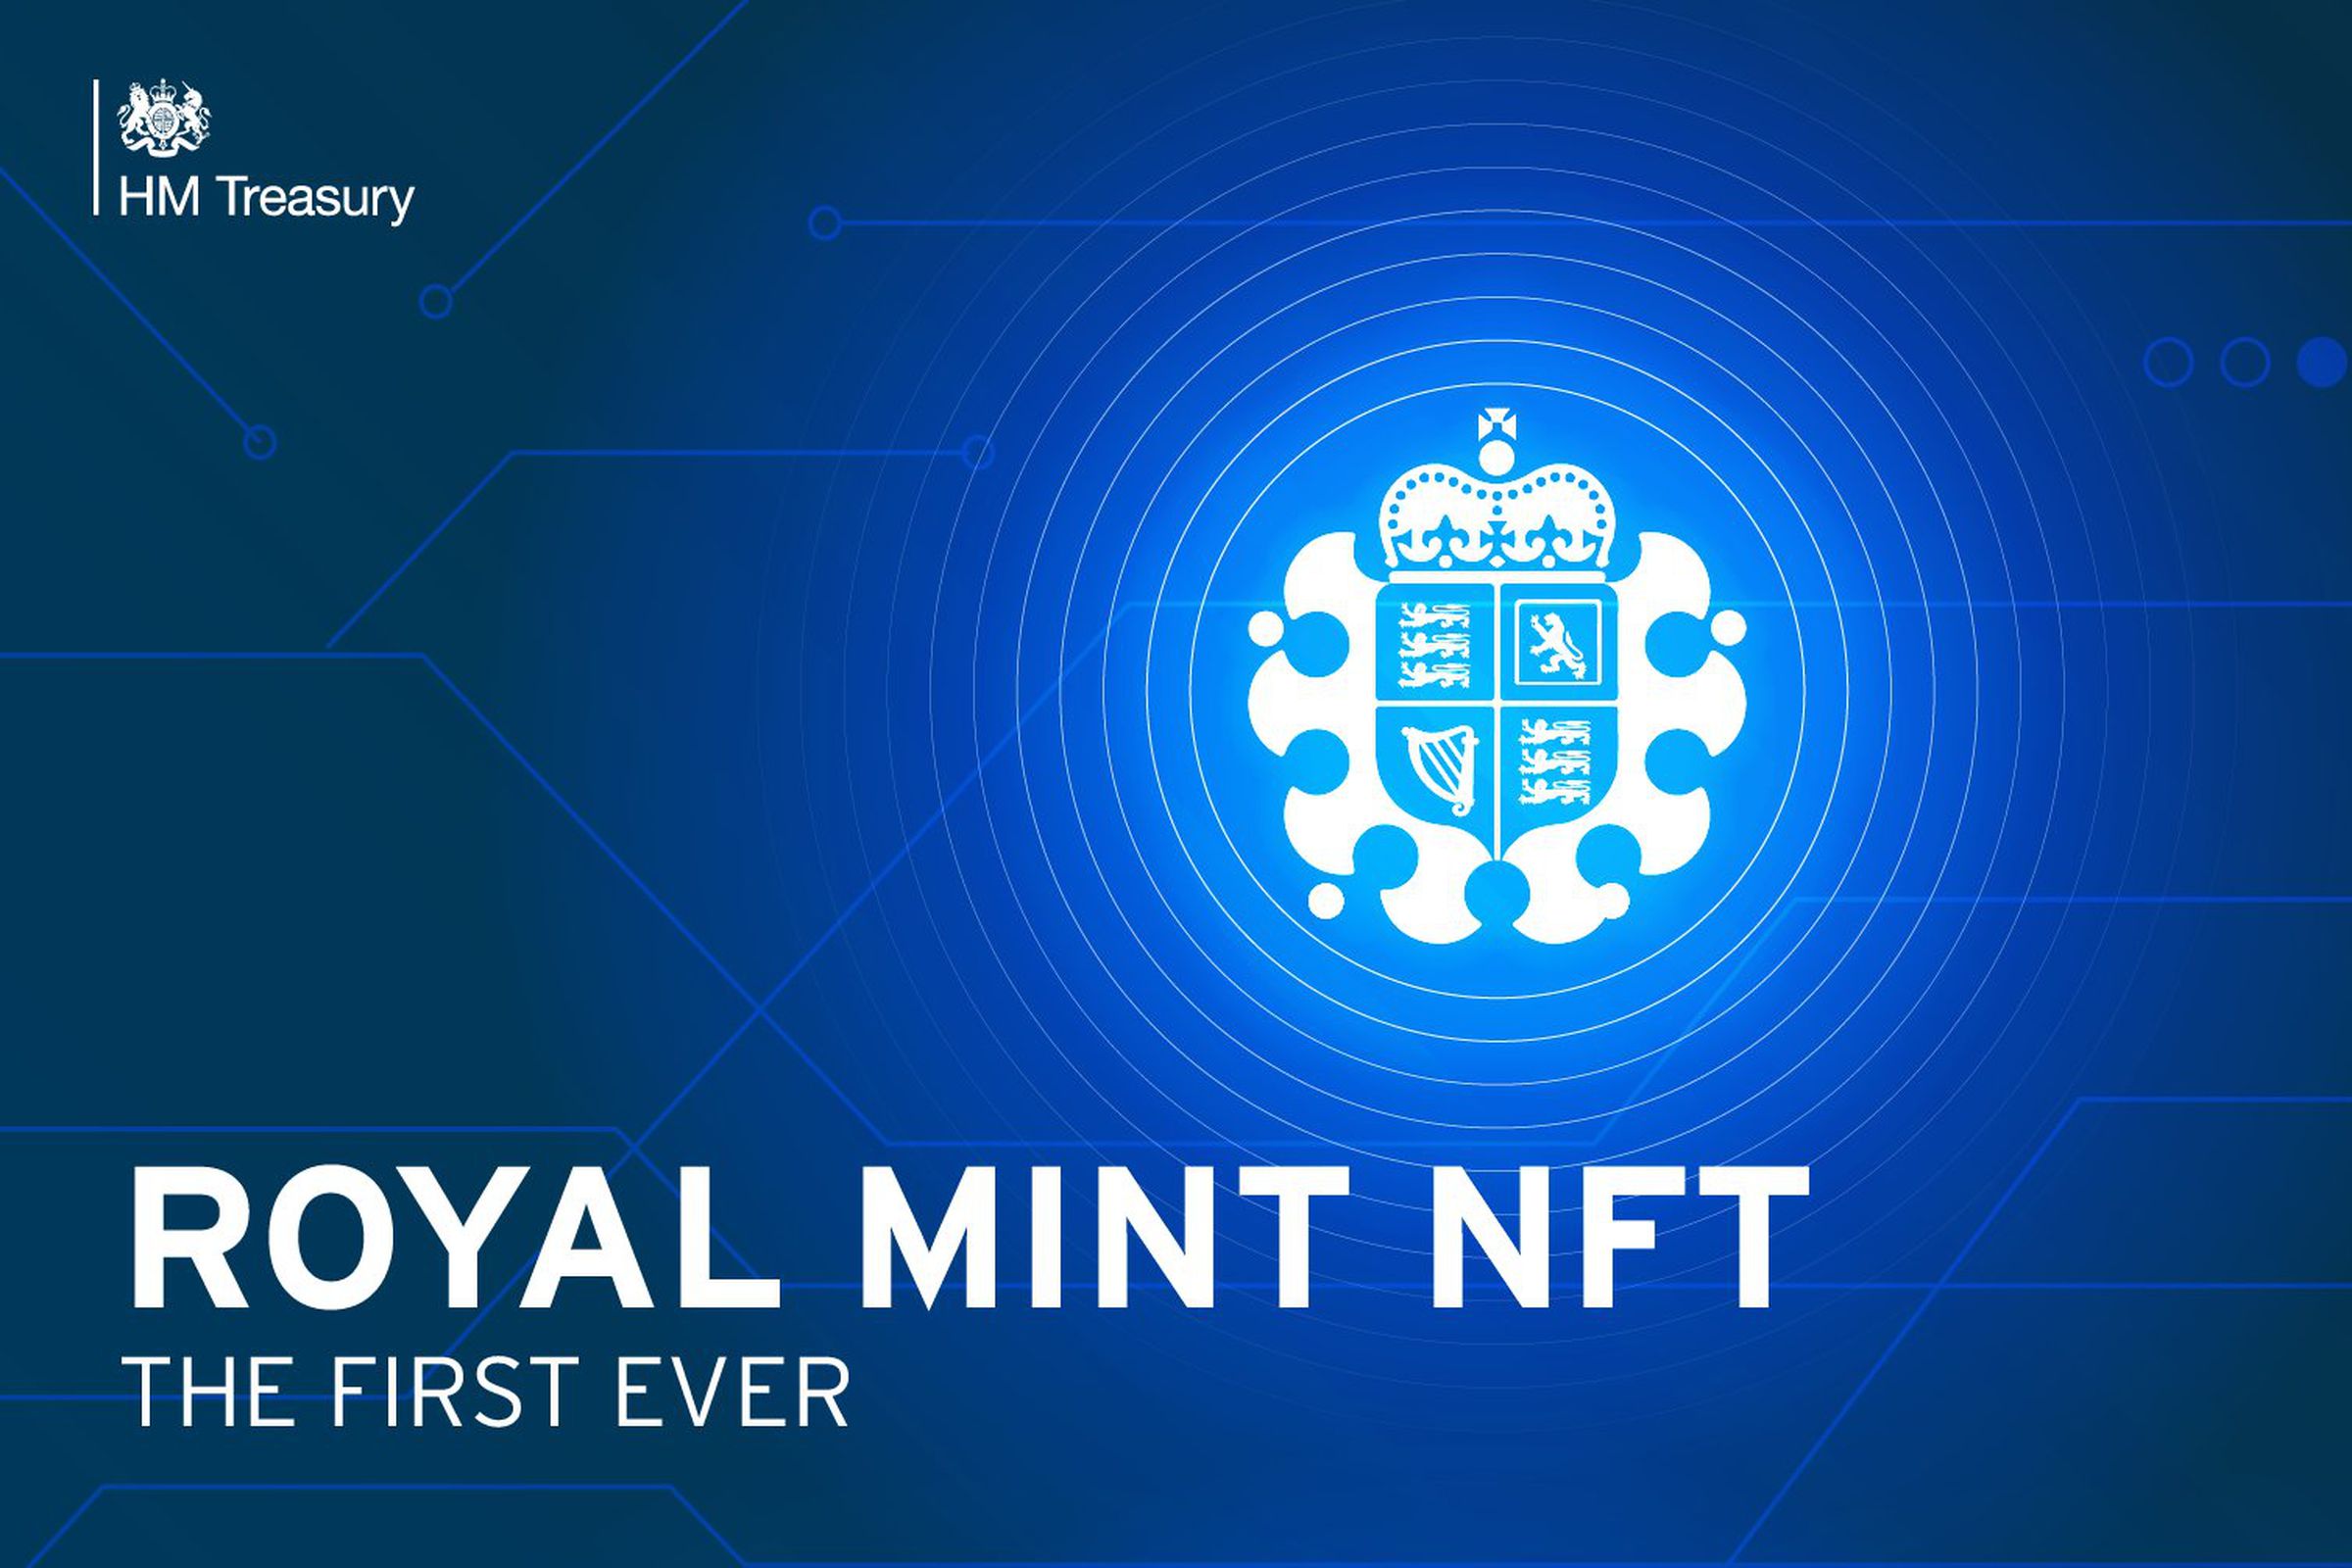 It’s unclear what the exact plan for the Royal Mint NFT is.